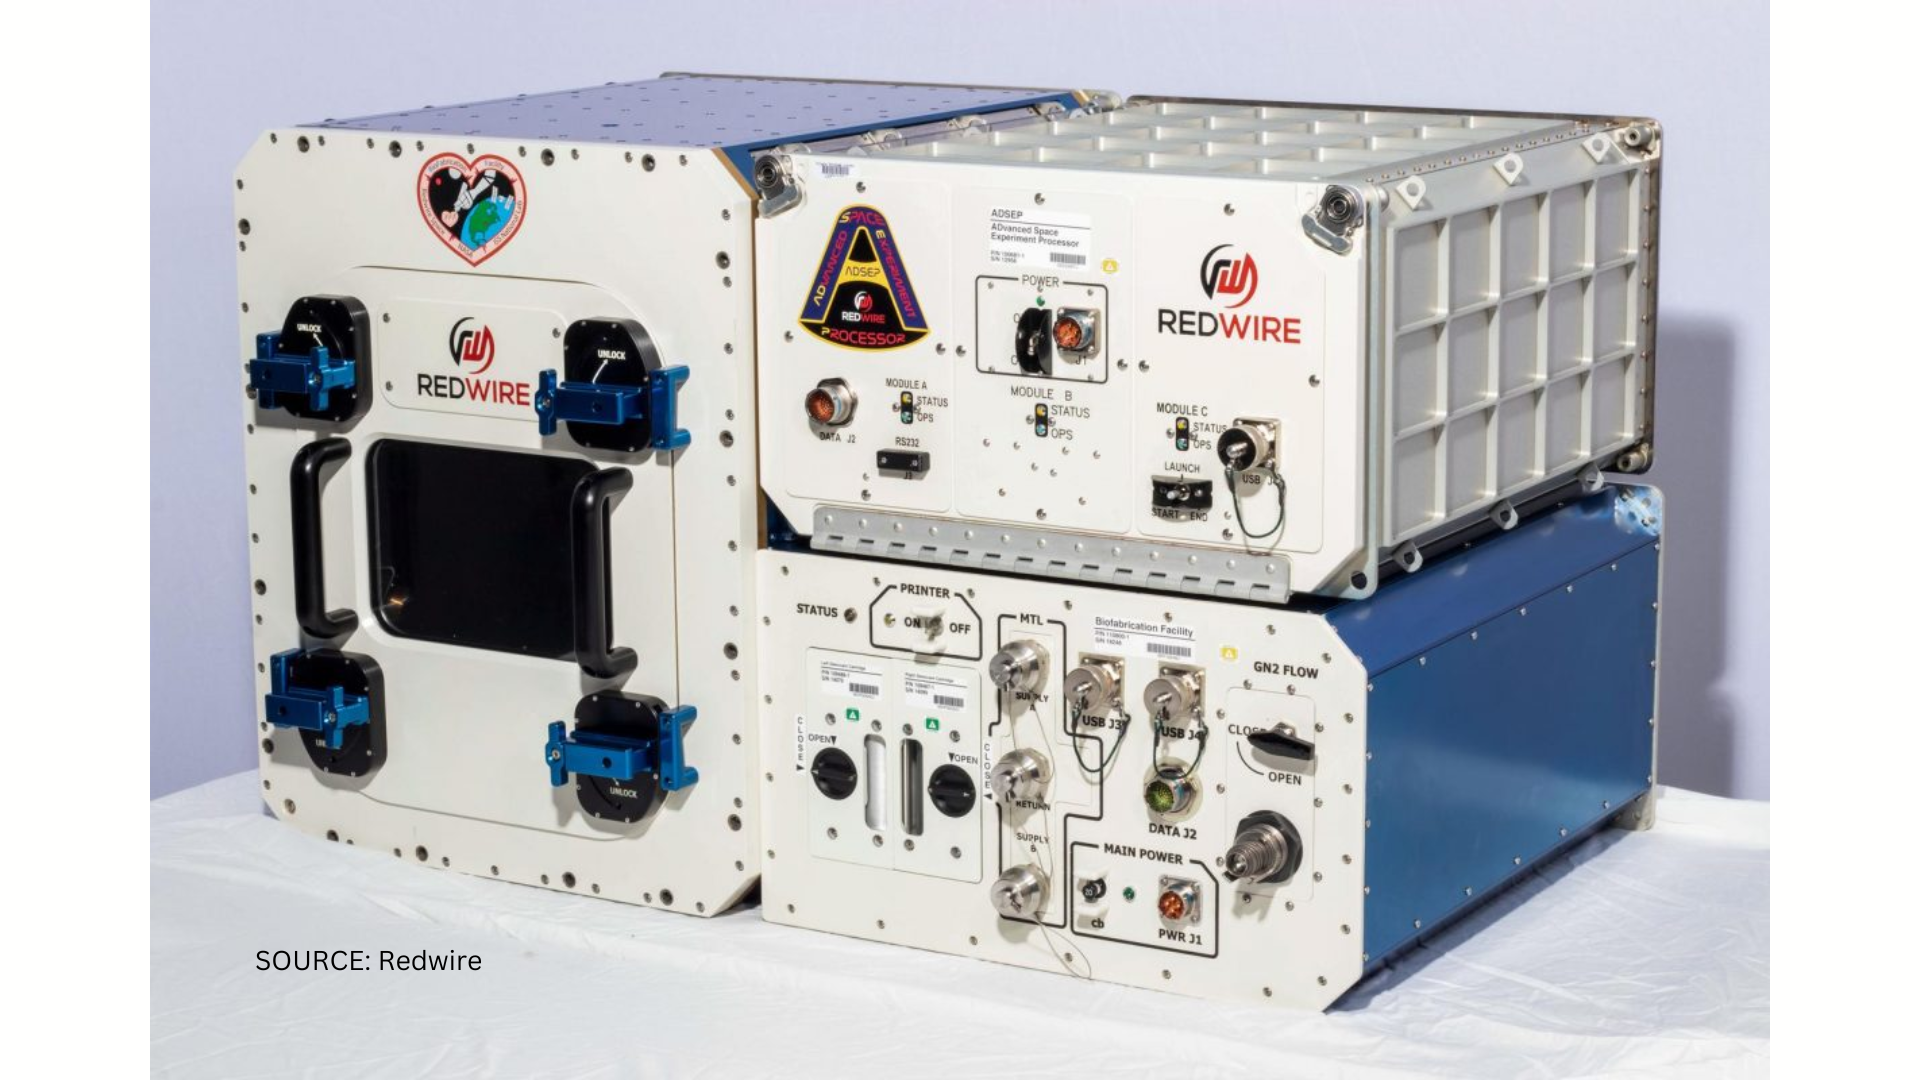 Redwire Corporation is launching its upgraded 3D bioprinter, the BioFabrication Facility (BFF), to the International Space Station (ISS).